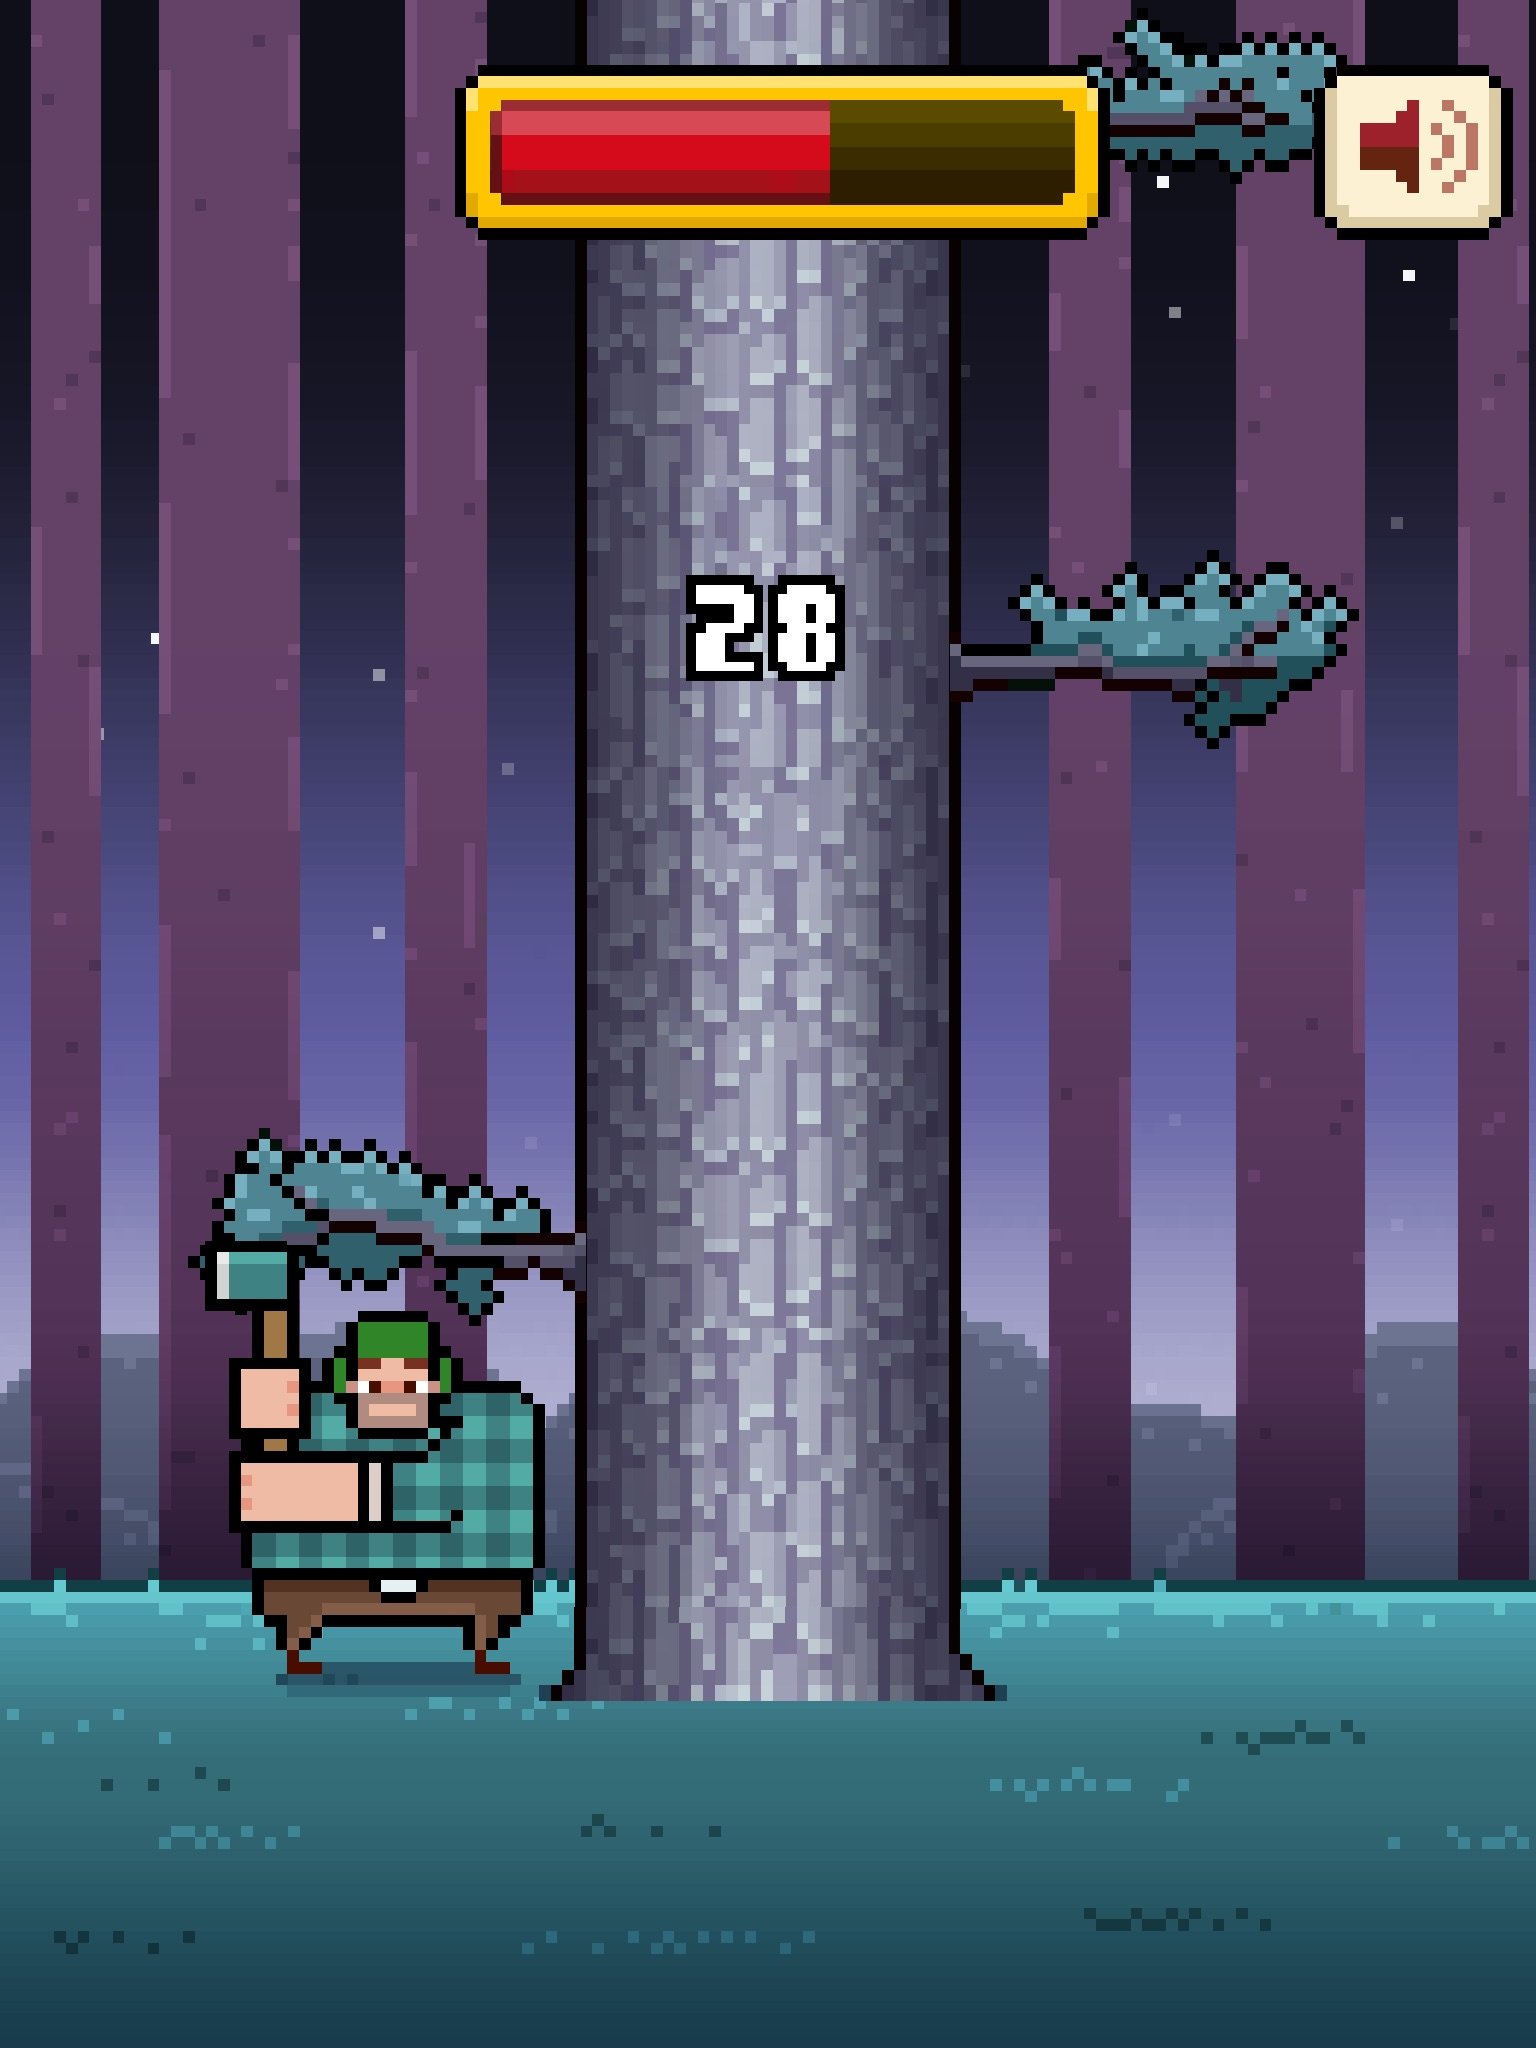 Timberman: Top 8 tips, hints, and cheats you need to know!